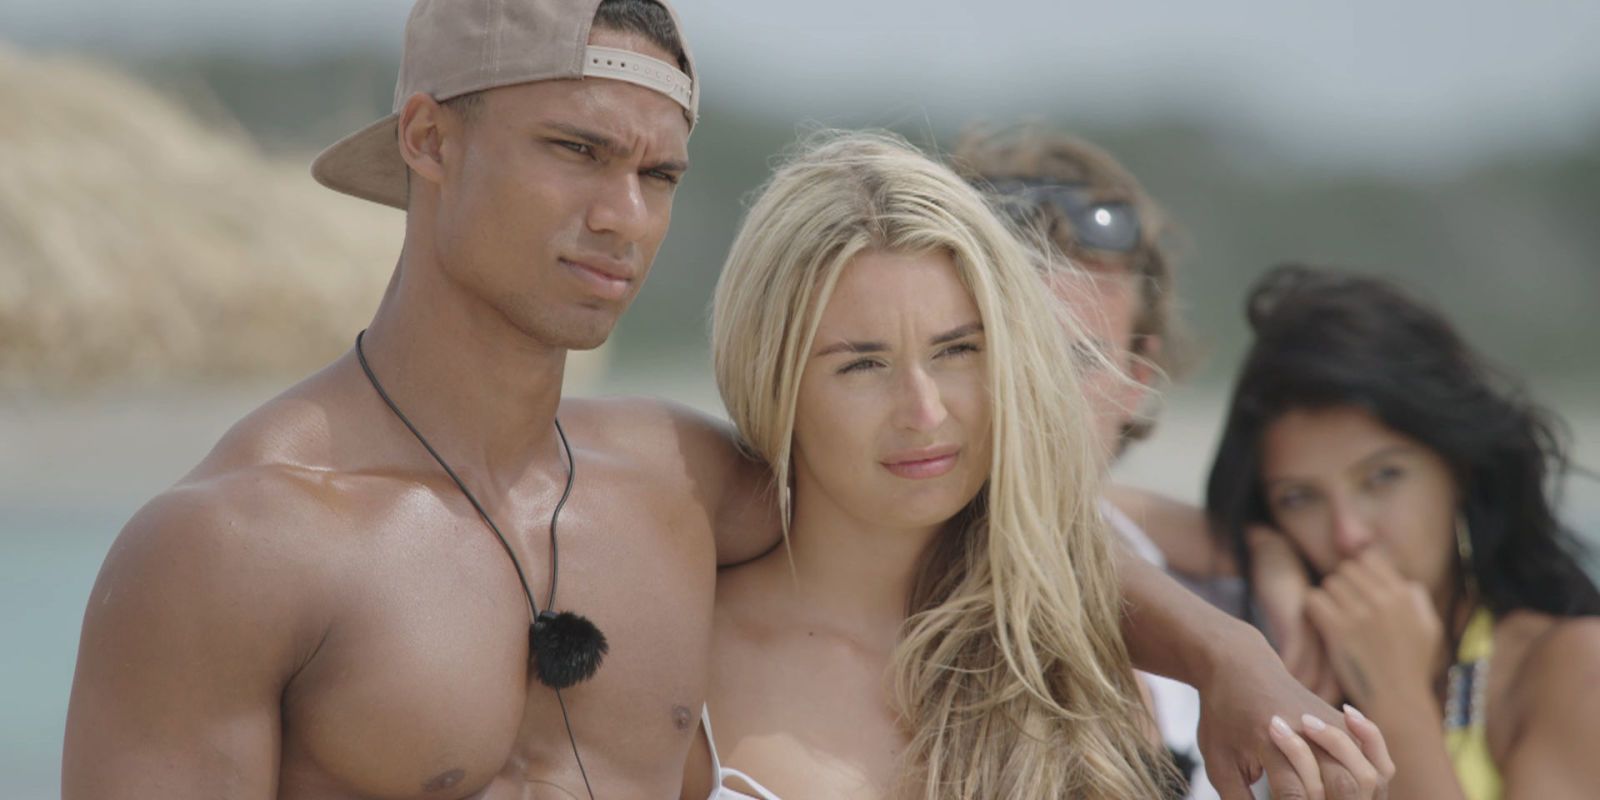 10 Best Love Island UK Couples Of All Time, According To Reddit